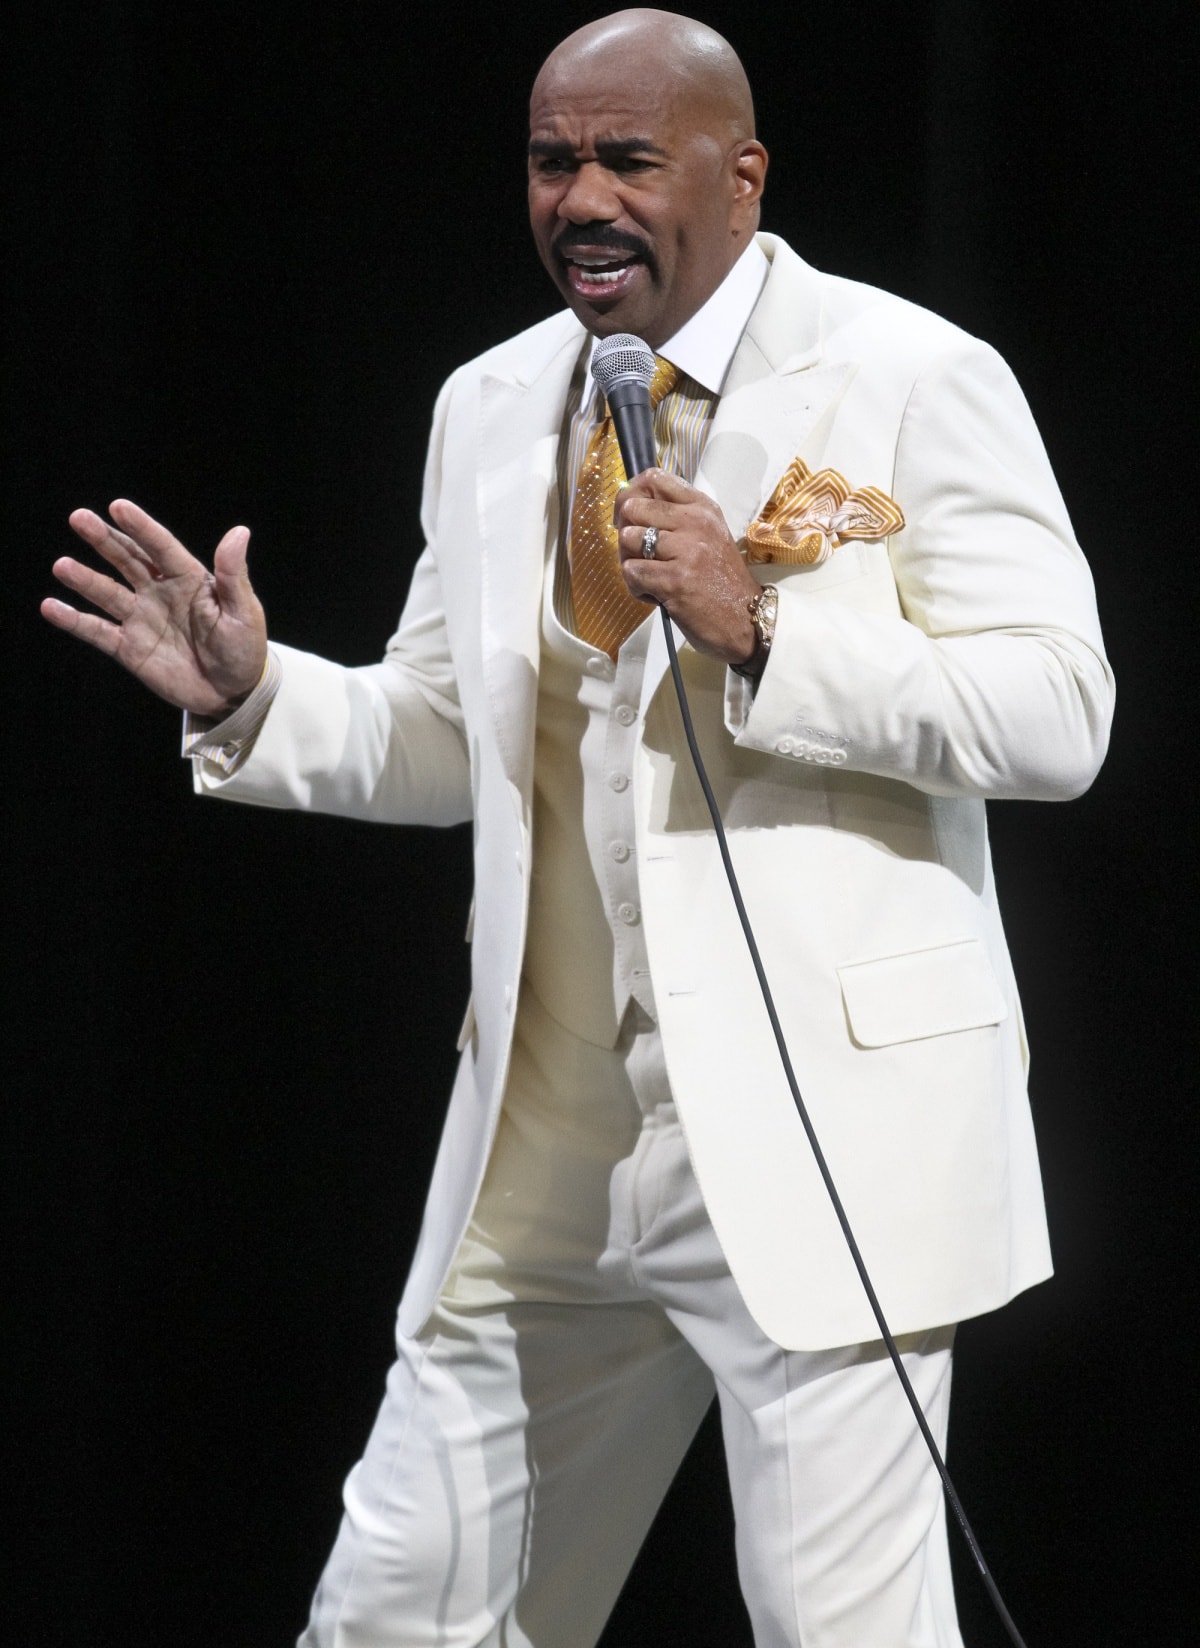 Steve Harvey performing stand-up comedy in Durham, North Carolina